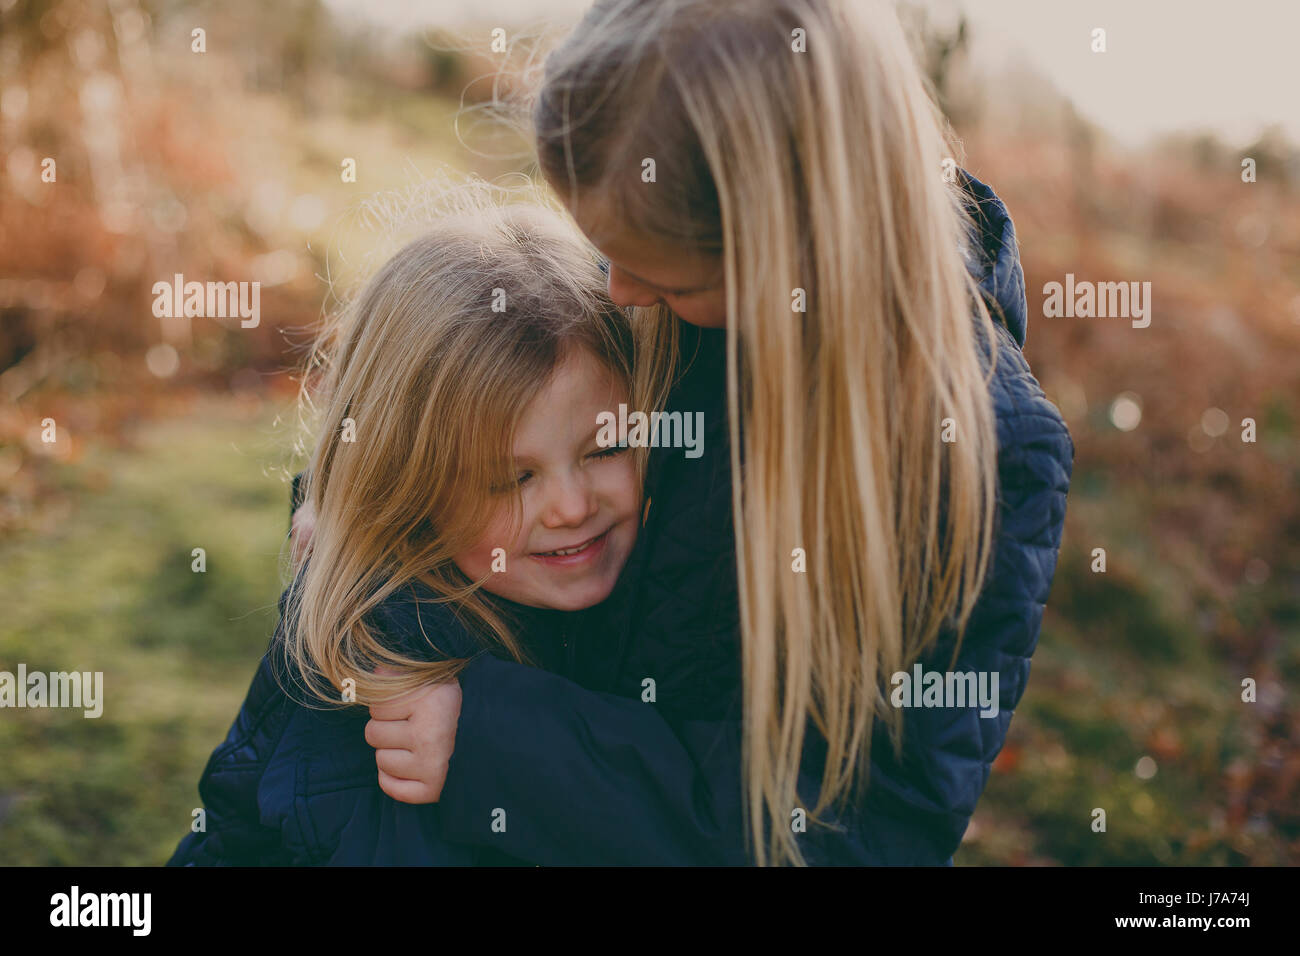 Two cute blond sisters cuddling outdoors Stock Photo